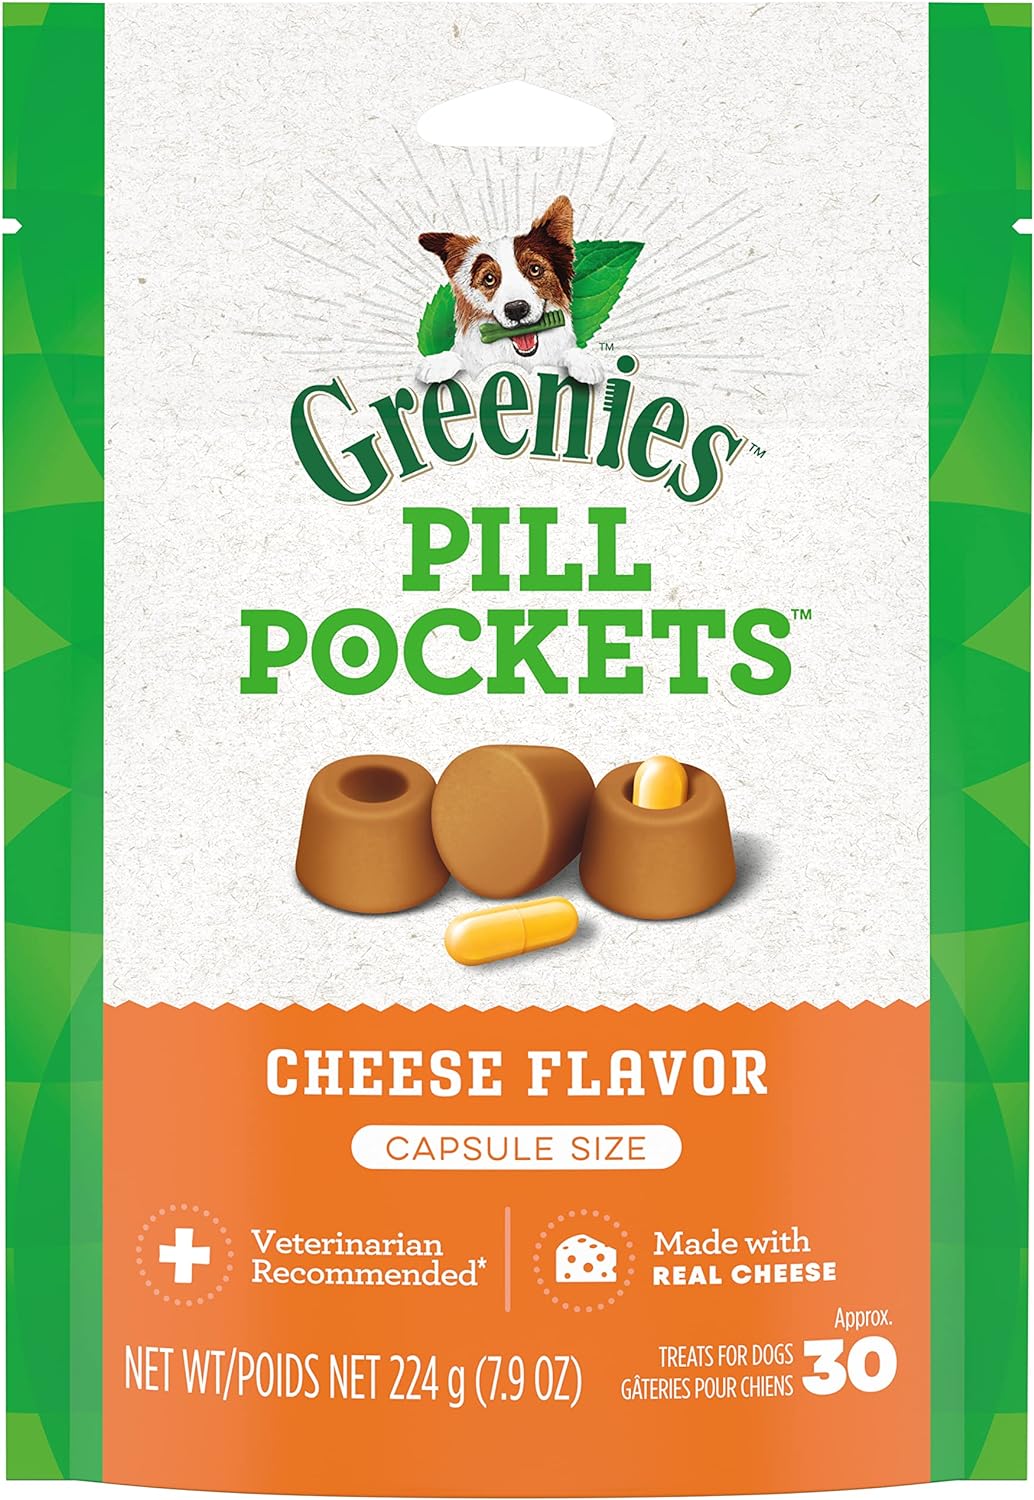 GREENIES PILL POCKETS for Dogs Capsule Size Natural Soft Dog Treats, Cheese Flavor, 7.9 oz. Pack (30 Treats)